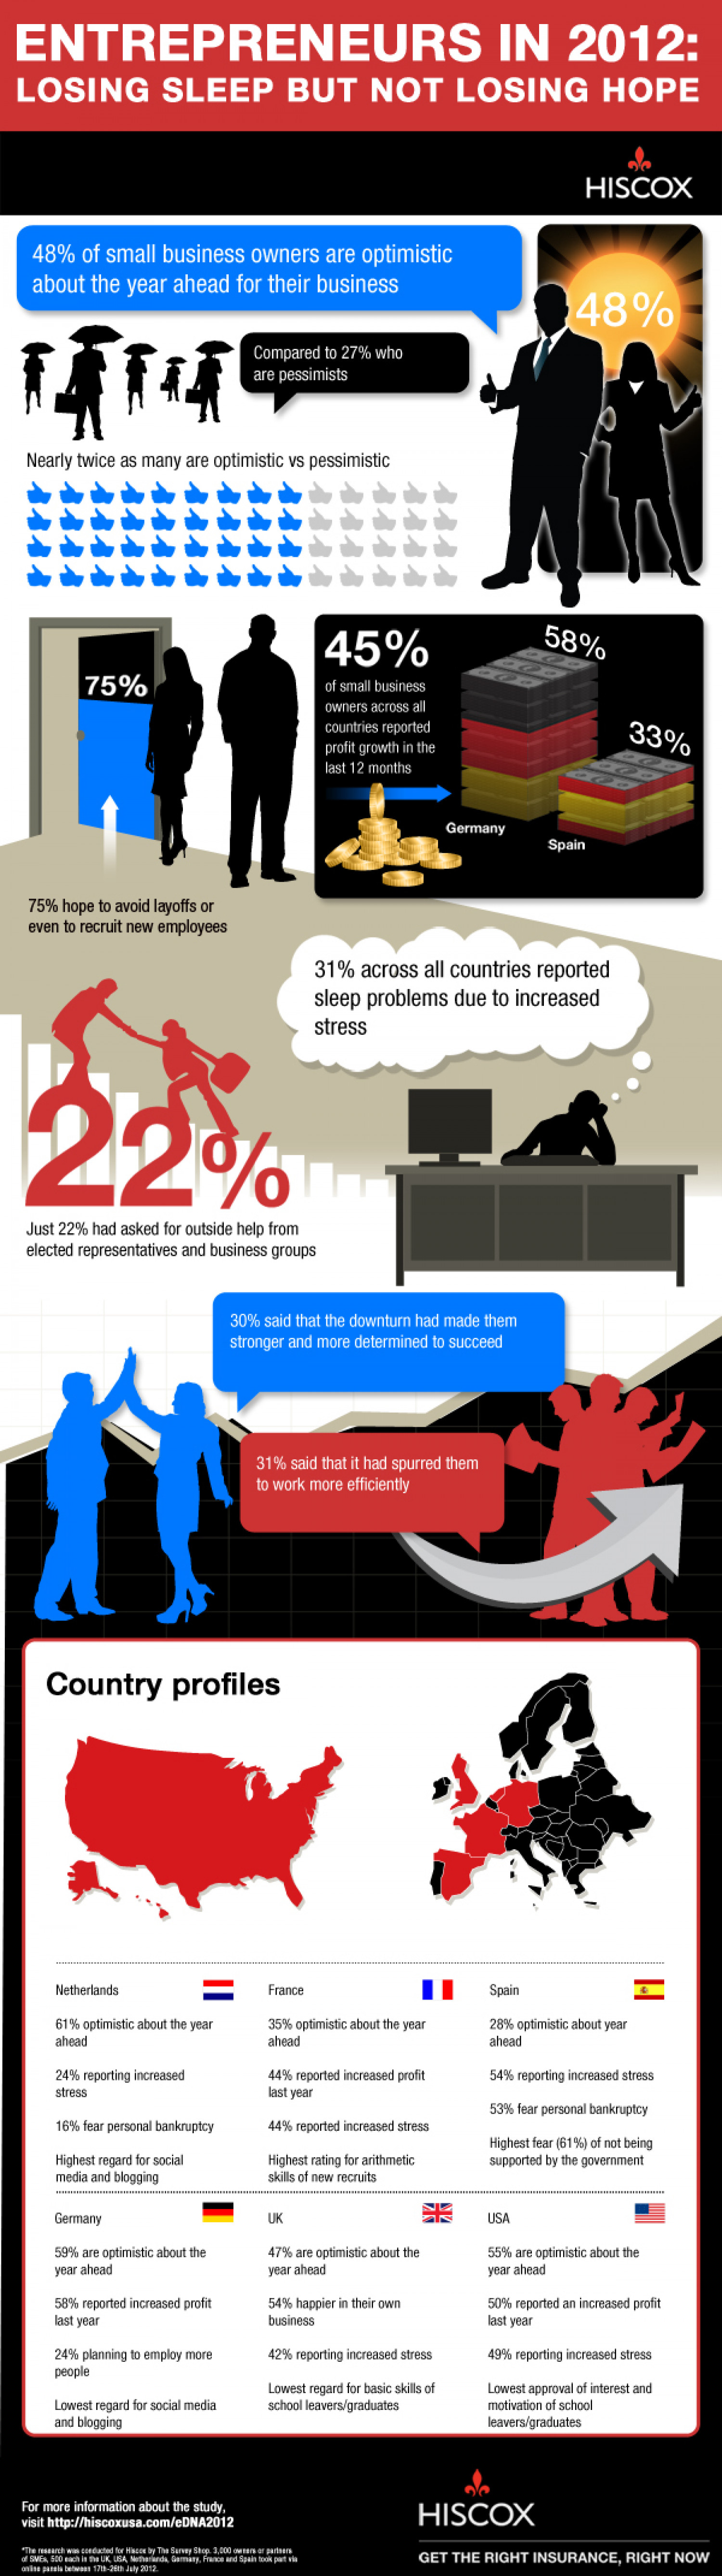 Hiscox Small Business Survey – DNA of an Entrepreneur 2012 Infographic